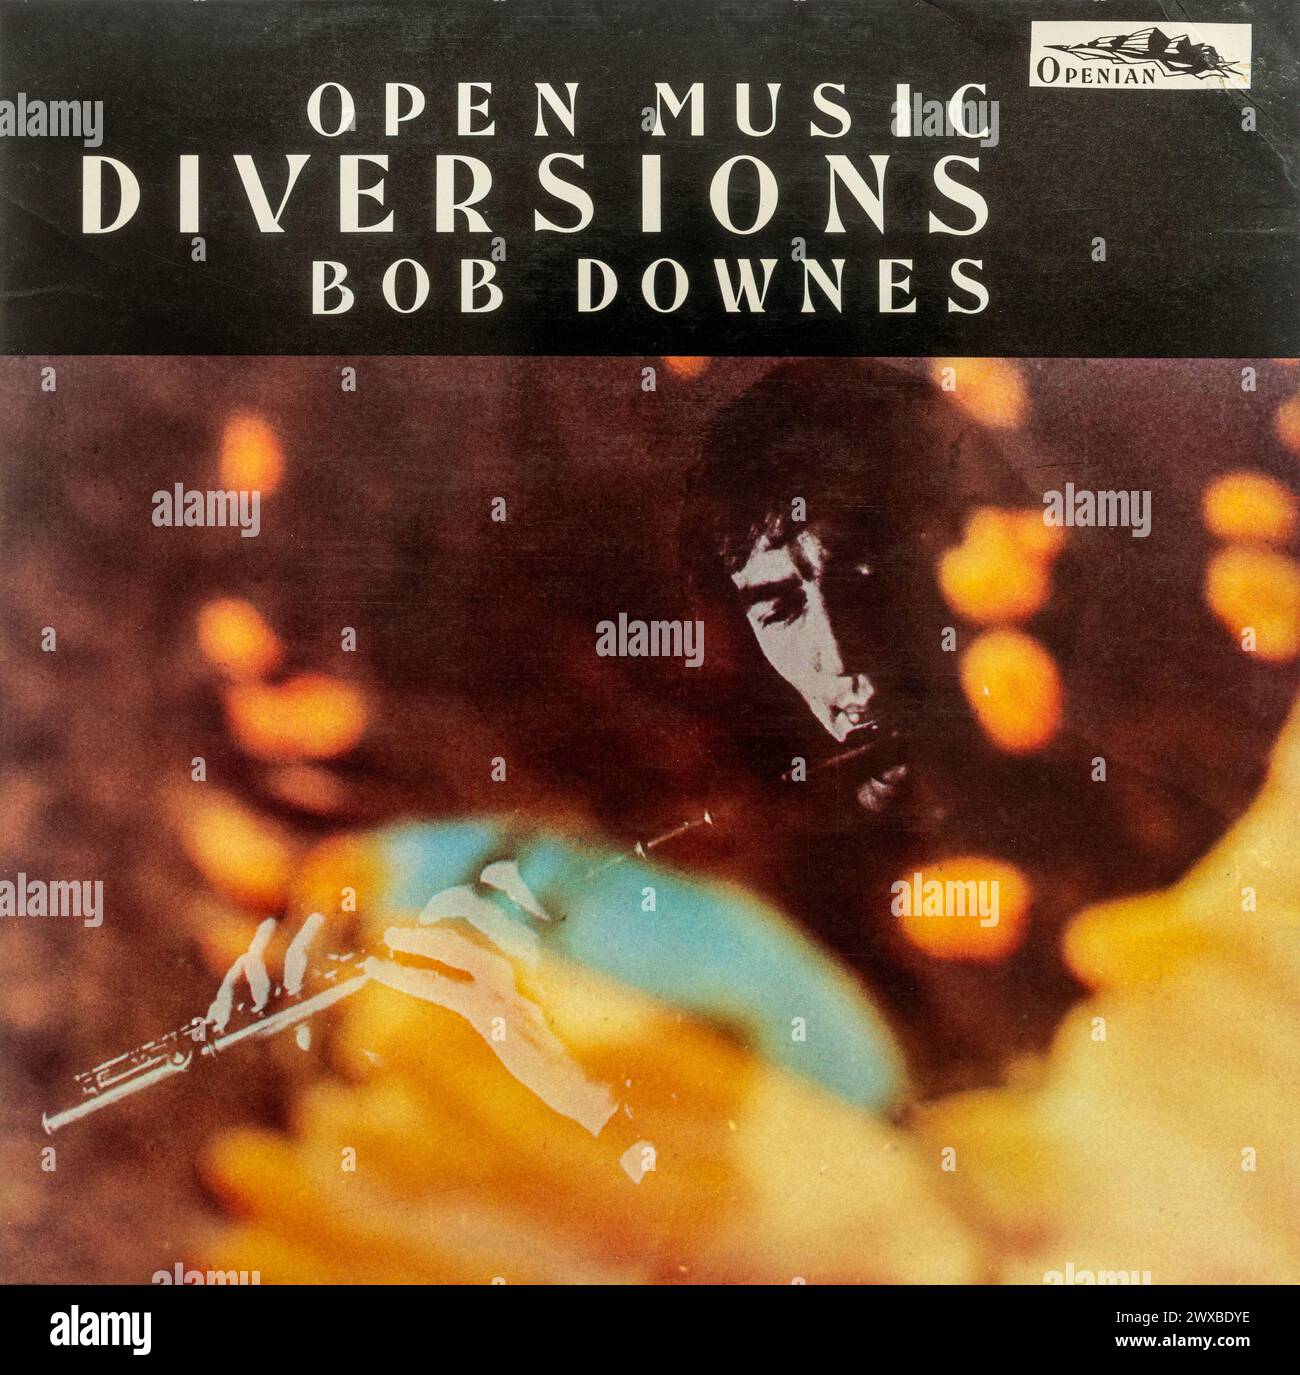 Bob Downes Open Music Diversions album, vinyl LP record cover, by the jazz saxophonist and flautist Stock Photo